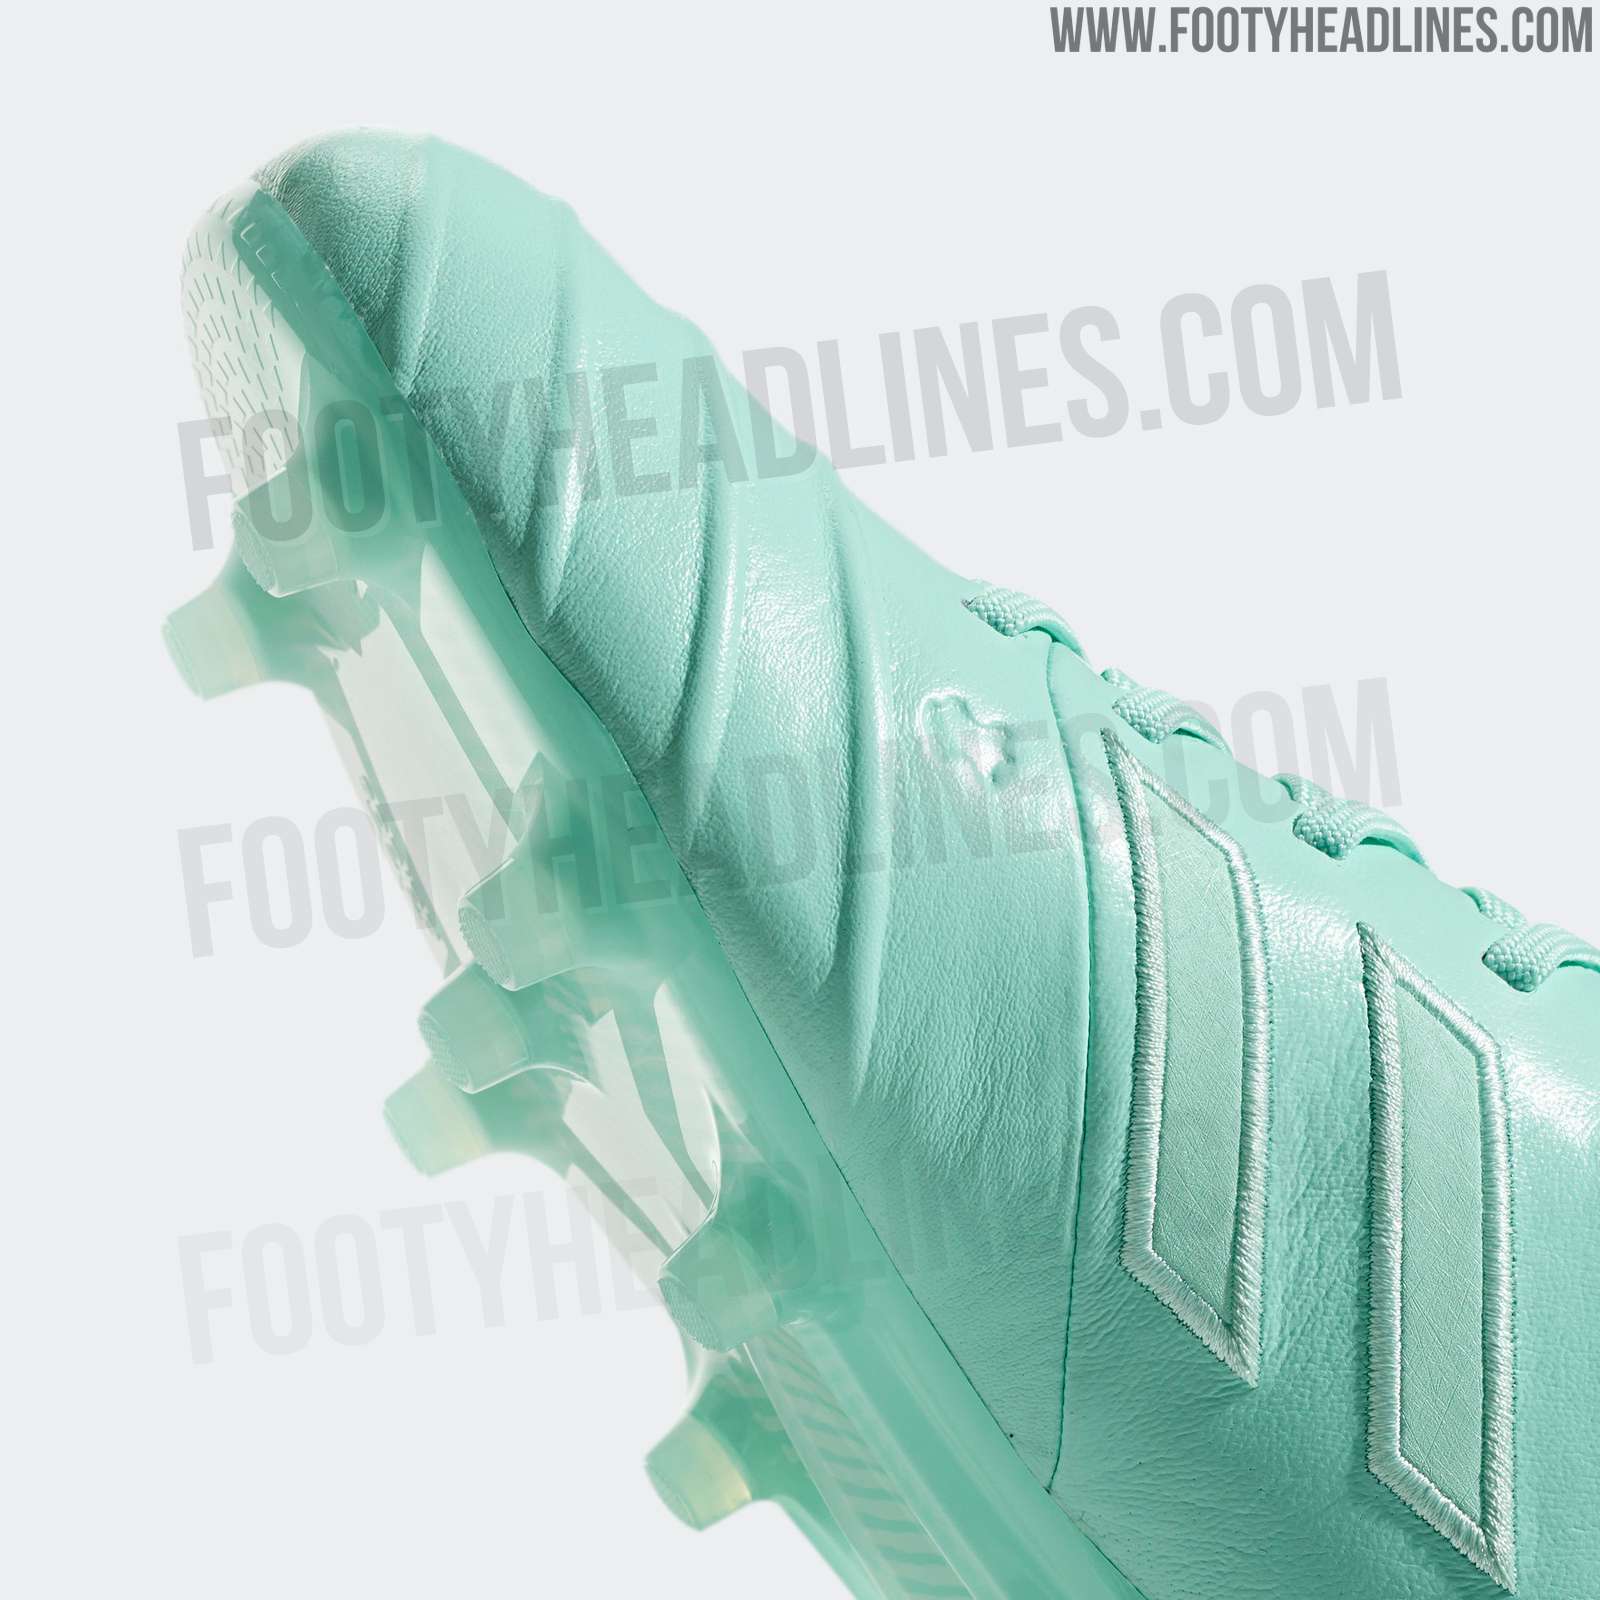 Spectral Adidas Boots Released Footy Headlines